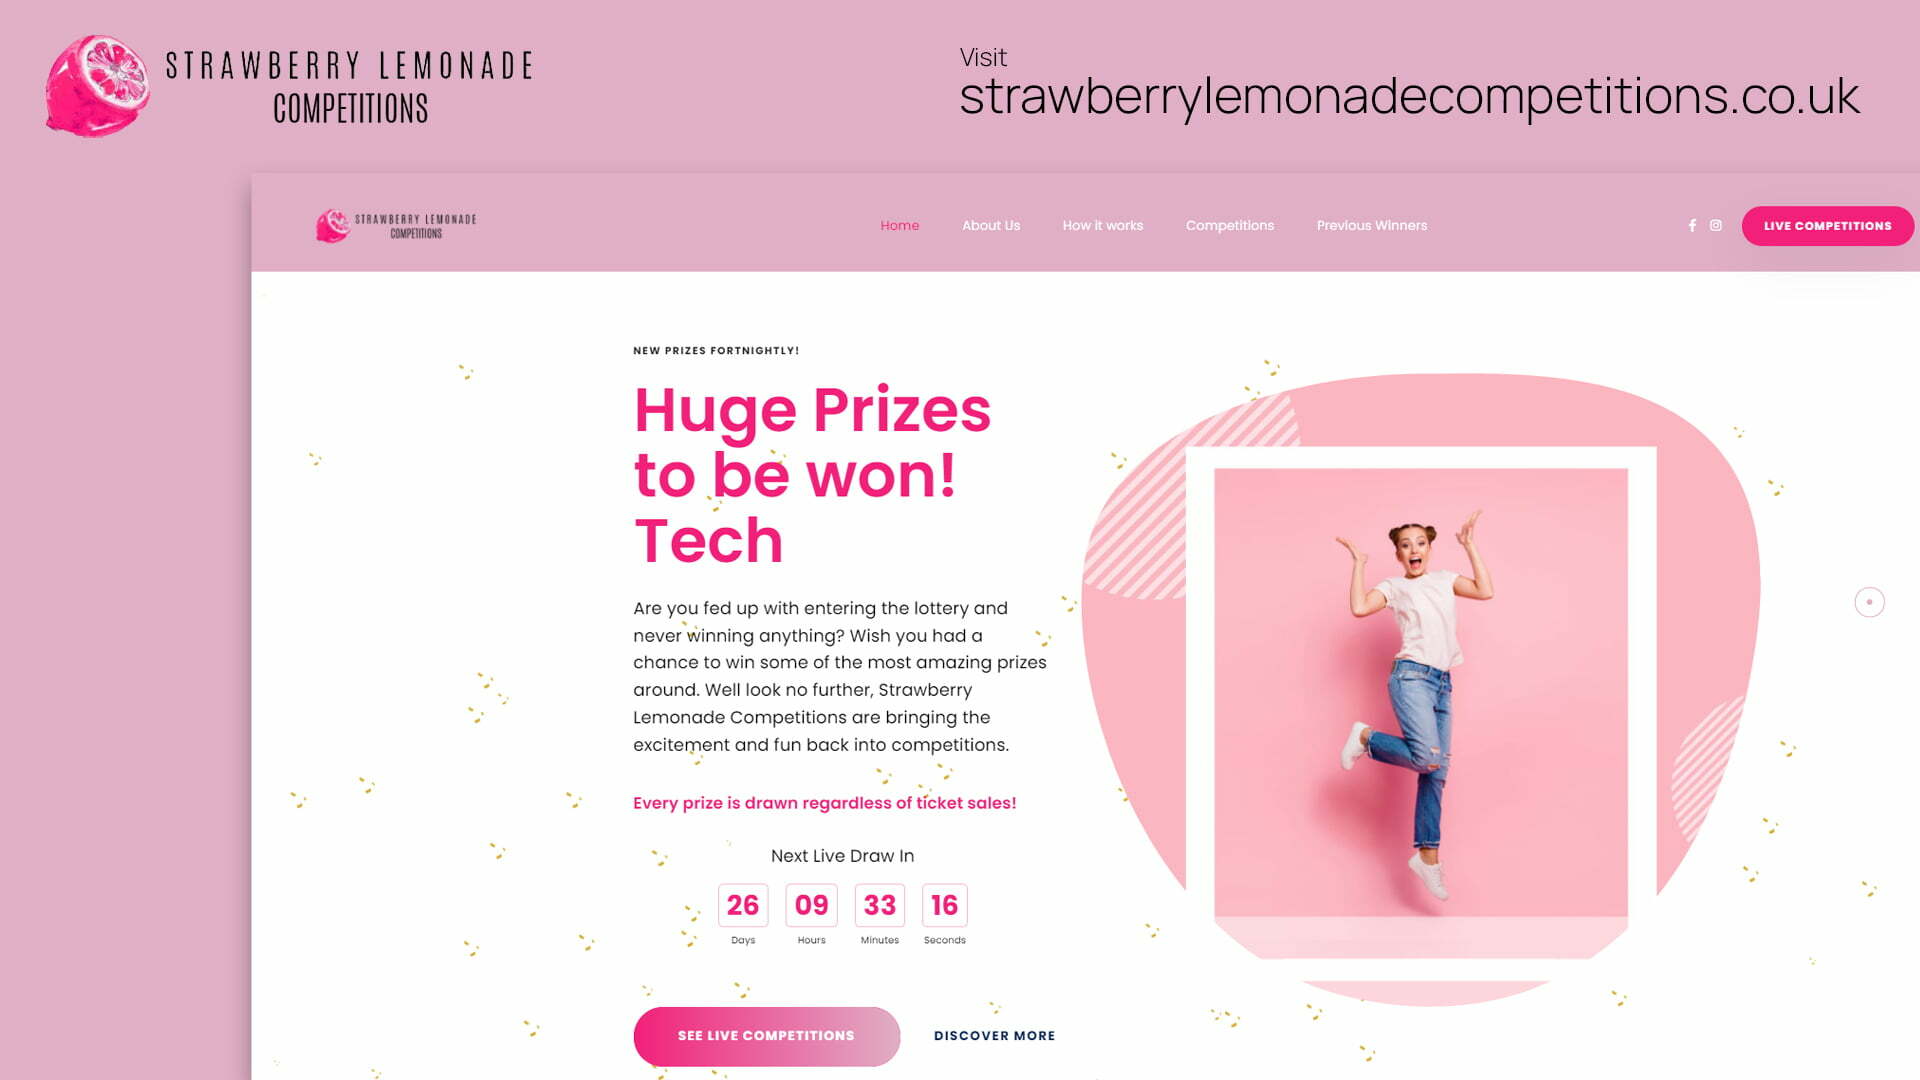 Strawberry Lemonade Competitions Website Launch!